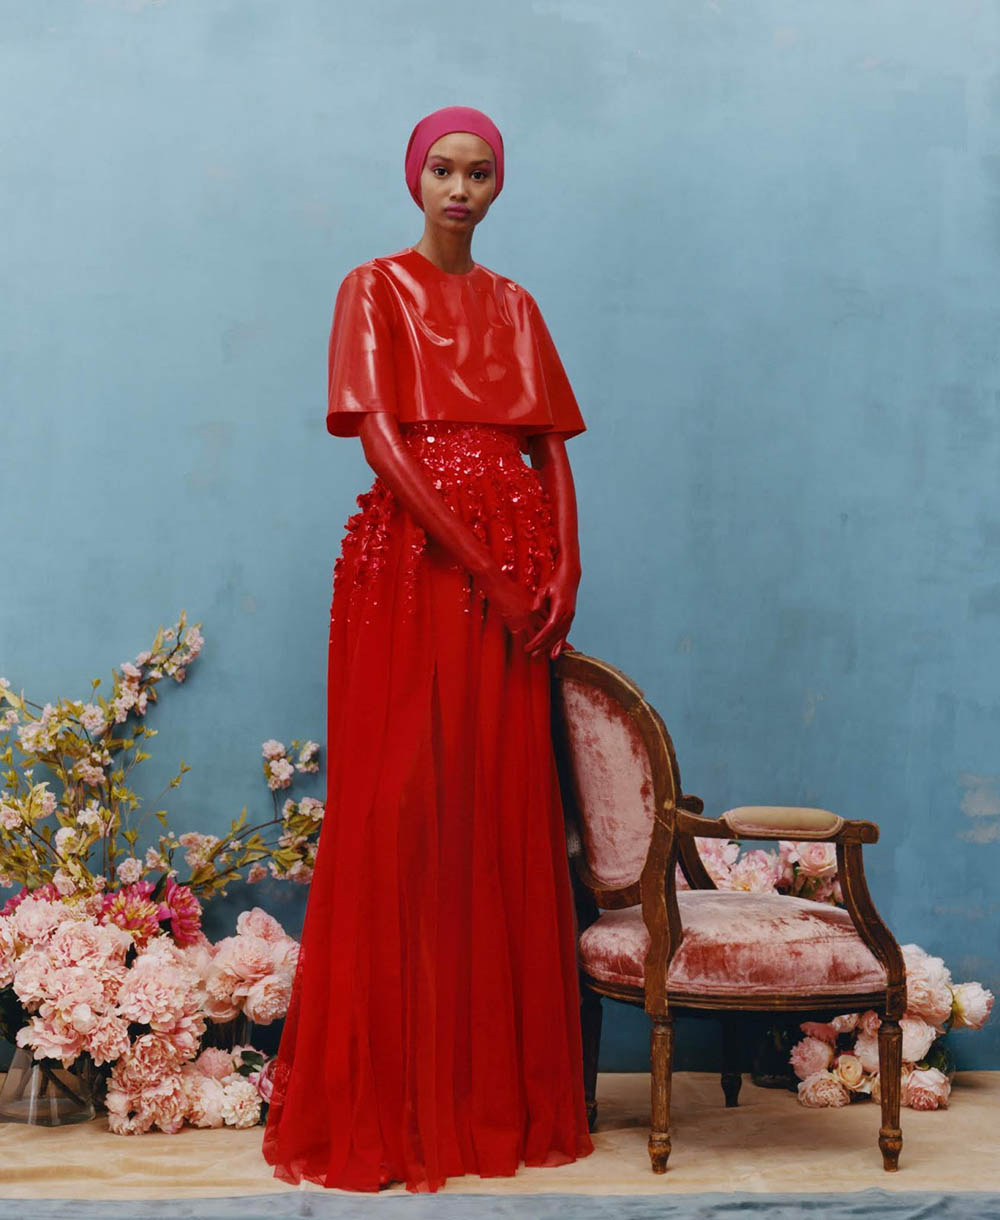 ''Fancy That'' by Tyler Mitchell for Vogue US April 2019